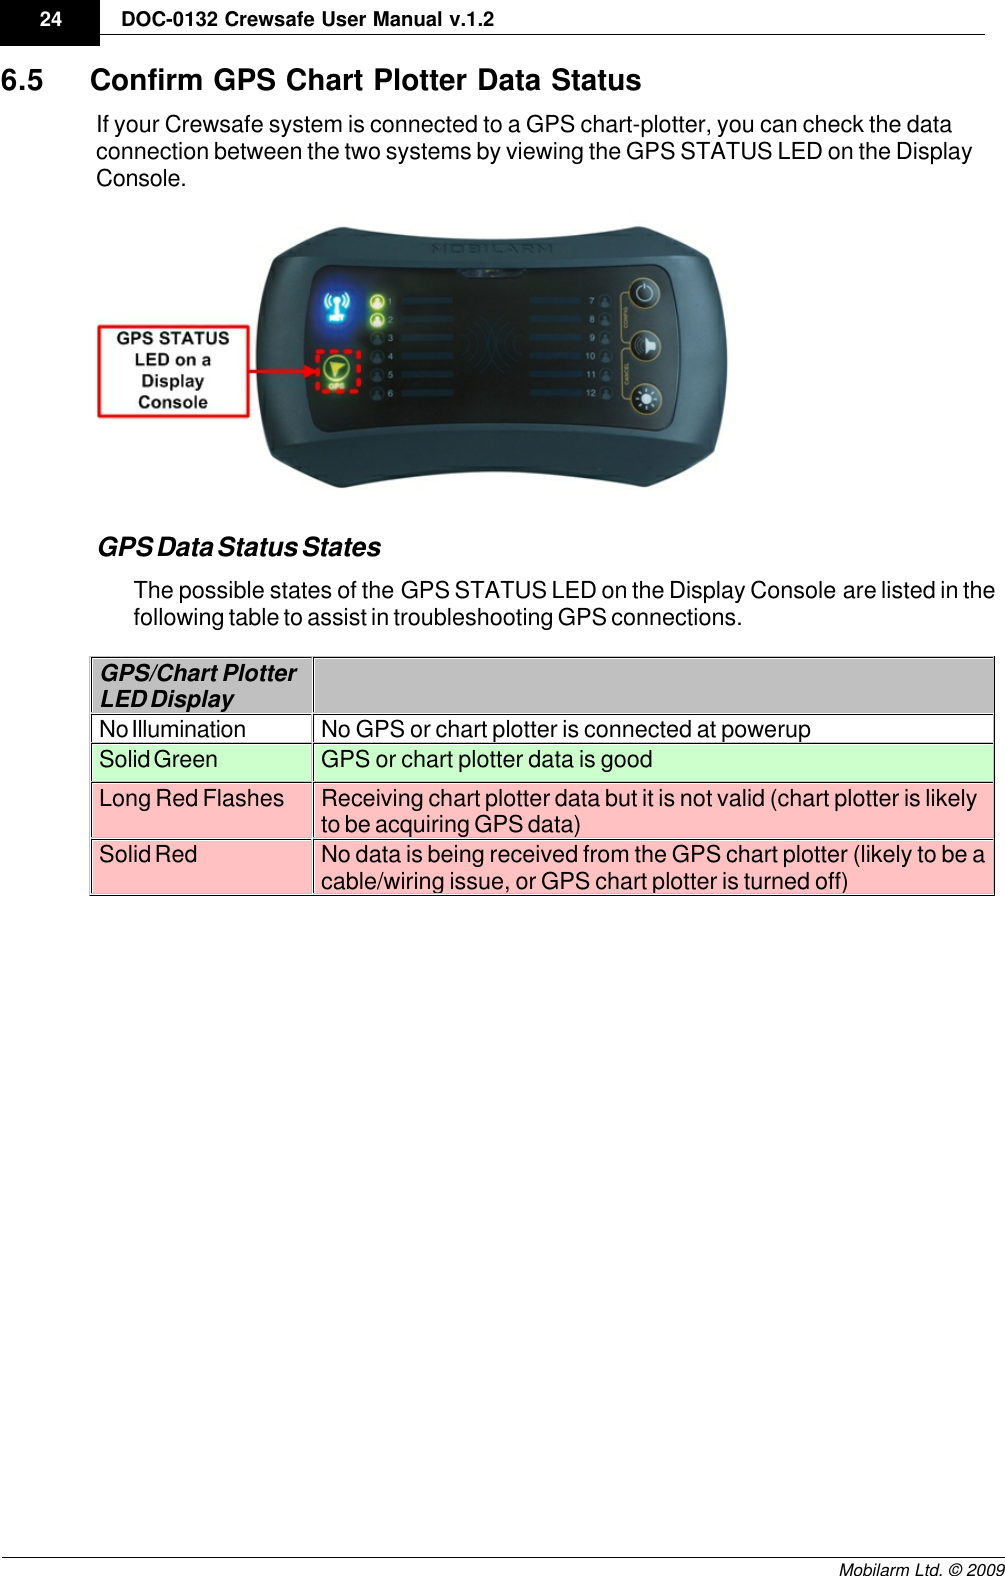 Draft24 DOC-0132 Crewsafe User Manual v.1.2Mobilarm Ltd. © 20096.5 Confirm GPS Chart Plotter Data StatusIf your Crewsafe system is connected to a GPS chart-plotter, you can check the dataconnection between the two systems by viewing the GPS STATUS LED on the DisplayConsole.GPS Data Status StatesThe possible states of the GPS STATUS LED on the Display Console are listed in thefollowing table to assist in troubleshooting GPS connections.GPS/Chart Plotter LED DisplayNo IlluminationNo GPS or chart plotter is connected at powerupSolid GreenGPS or chart plotter data is goodLong Red FlashesReceiving chart plotter data but it is not valid (chart plotter is likelyto be acquiring GPS data)Solid RedNo data is being received from the GPS chart plotter (likely to be acable/wiring issue, or GPS chart plotter is turned off)